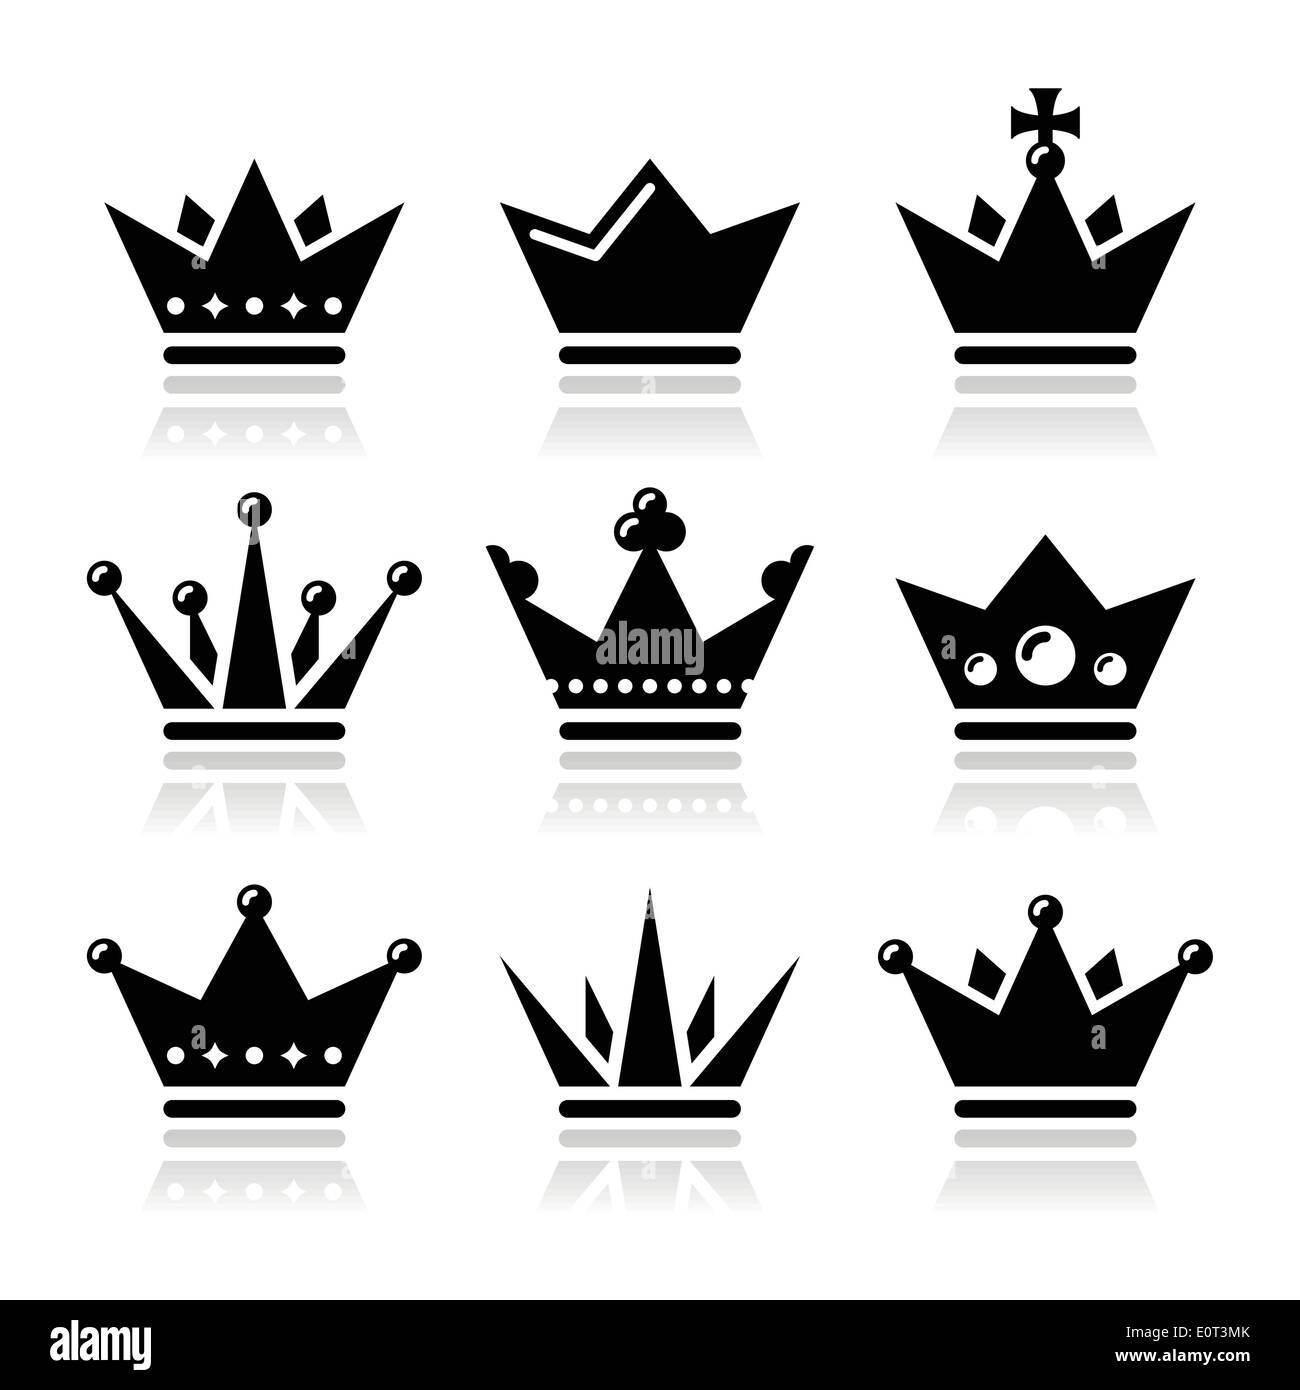 Crown, royal family icons set Stock Vector